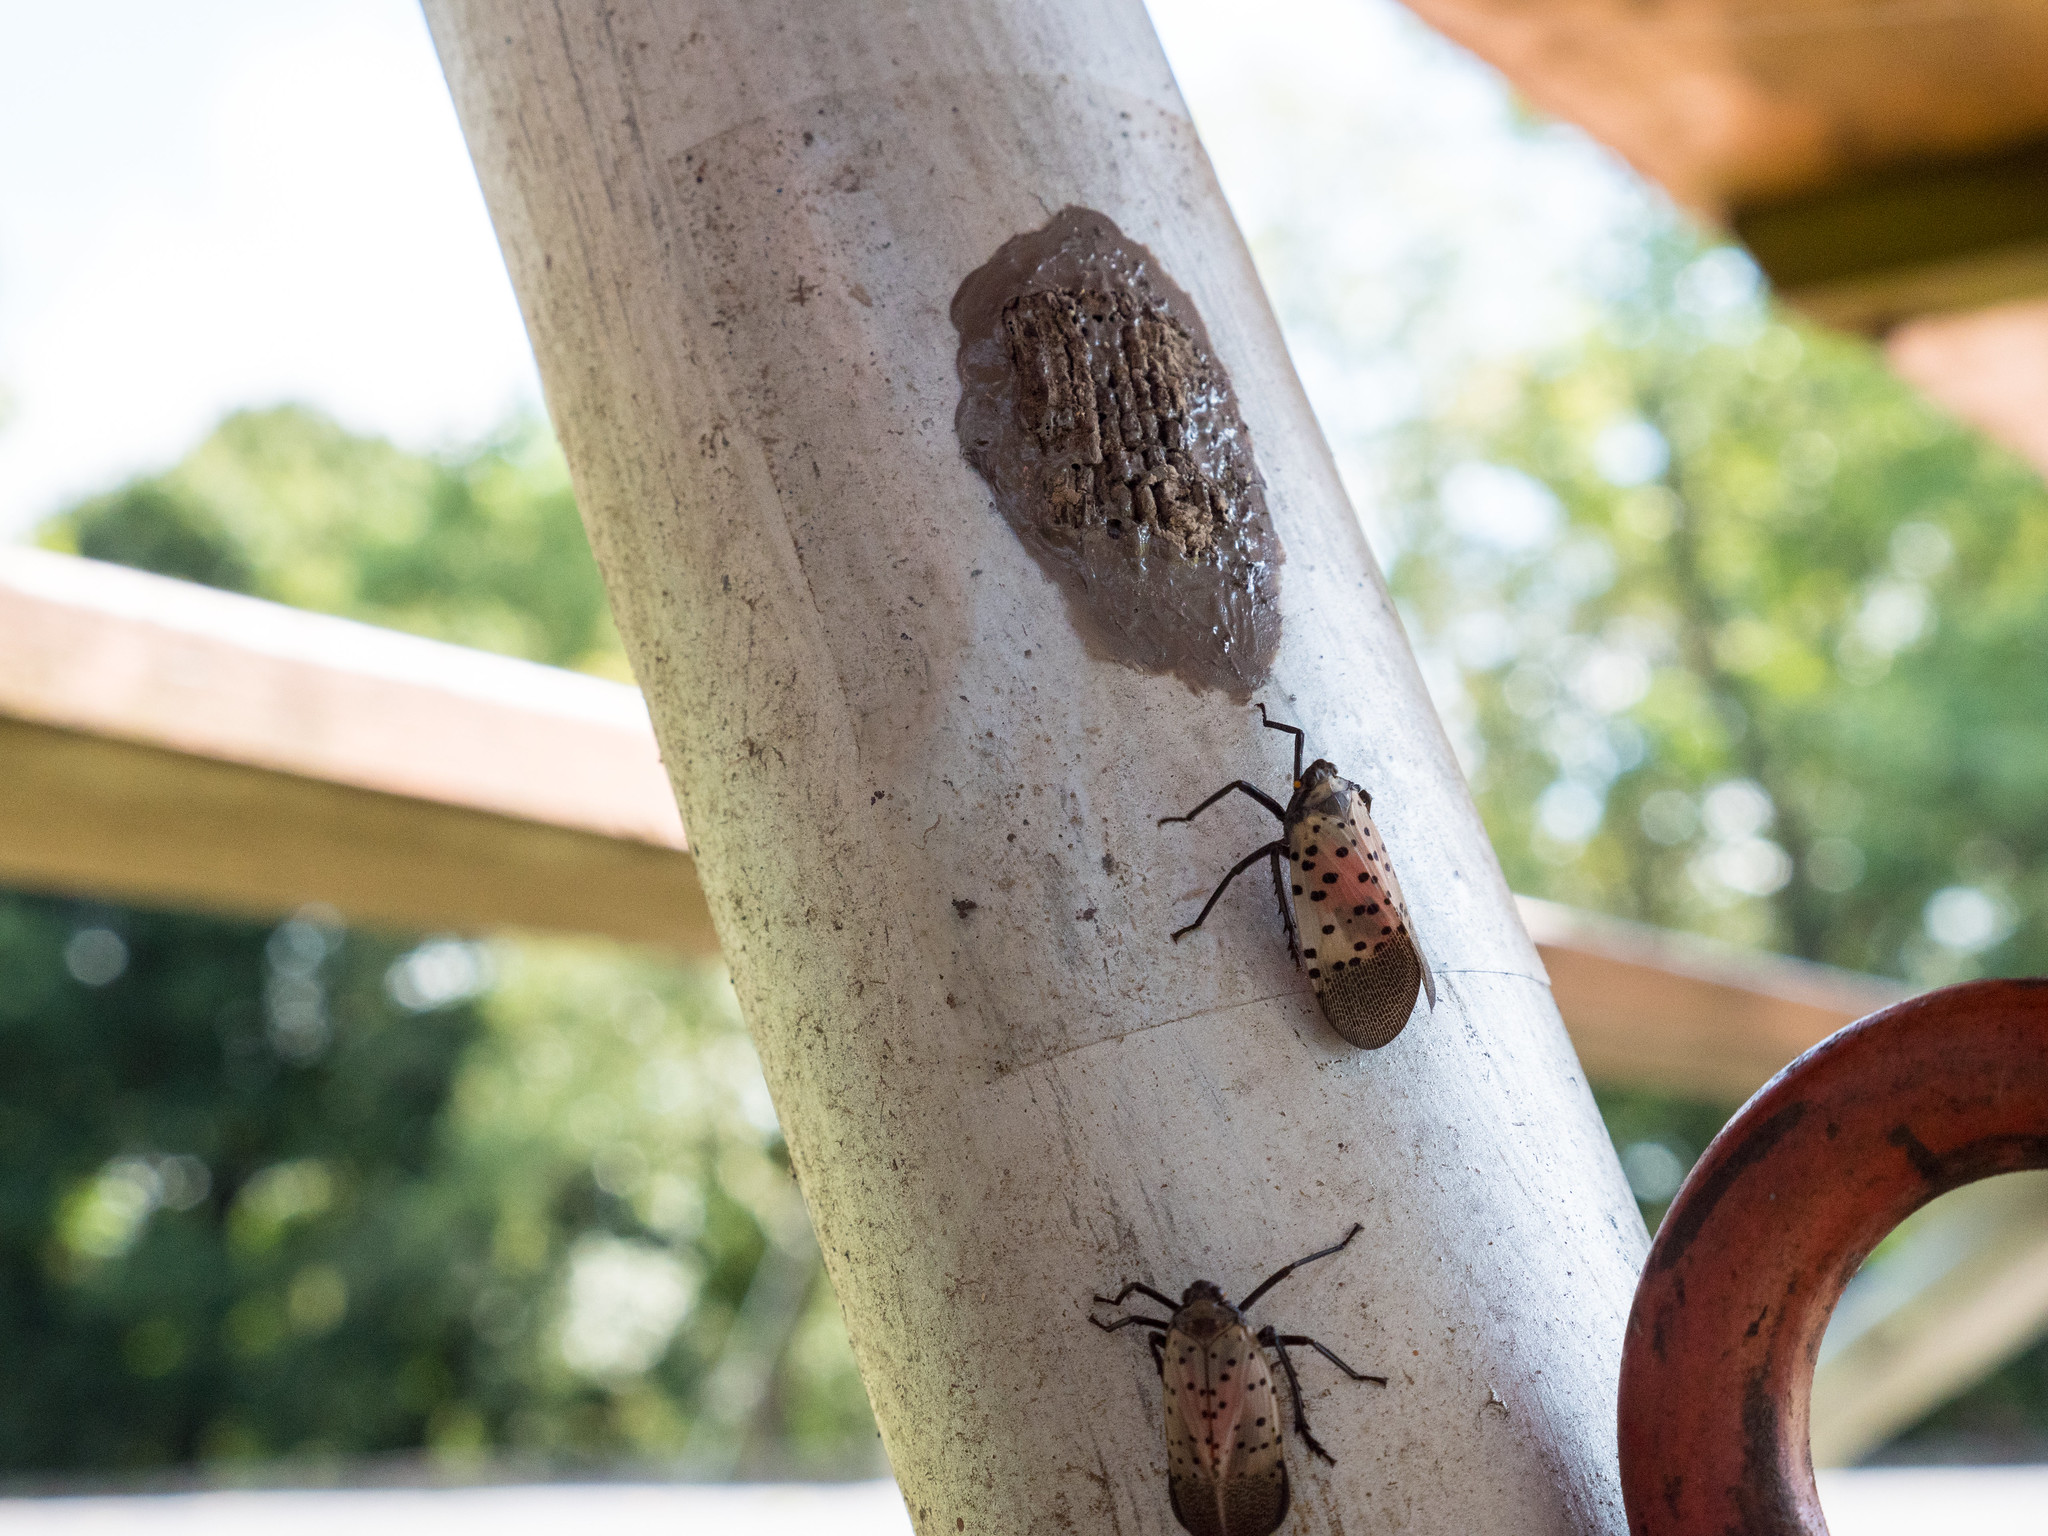 leg of metal table. 2 bugs - lanternflies - crawling on the pole toward the eggs